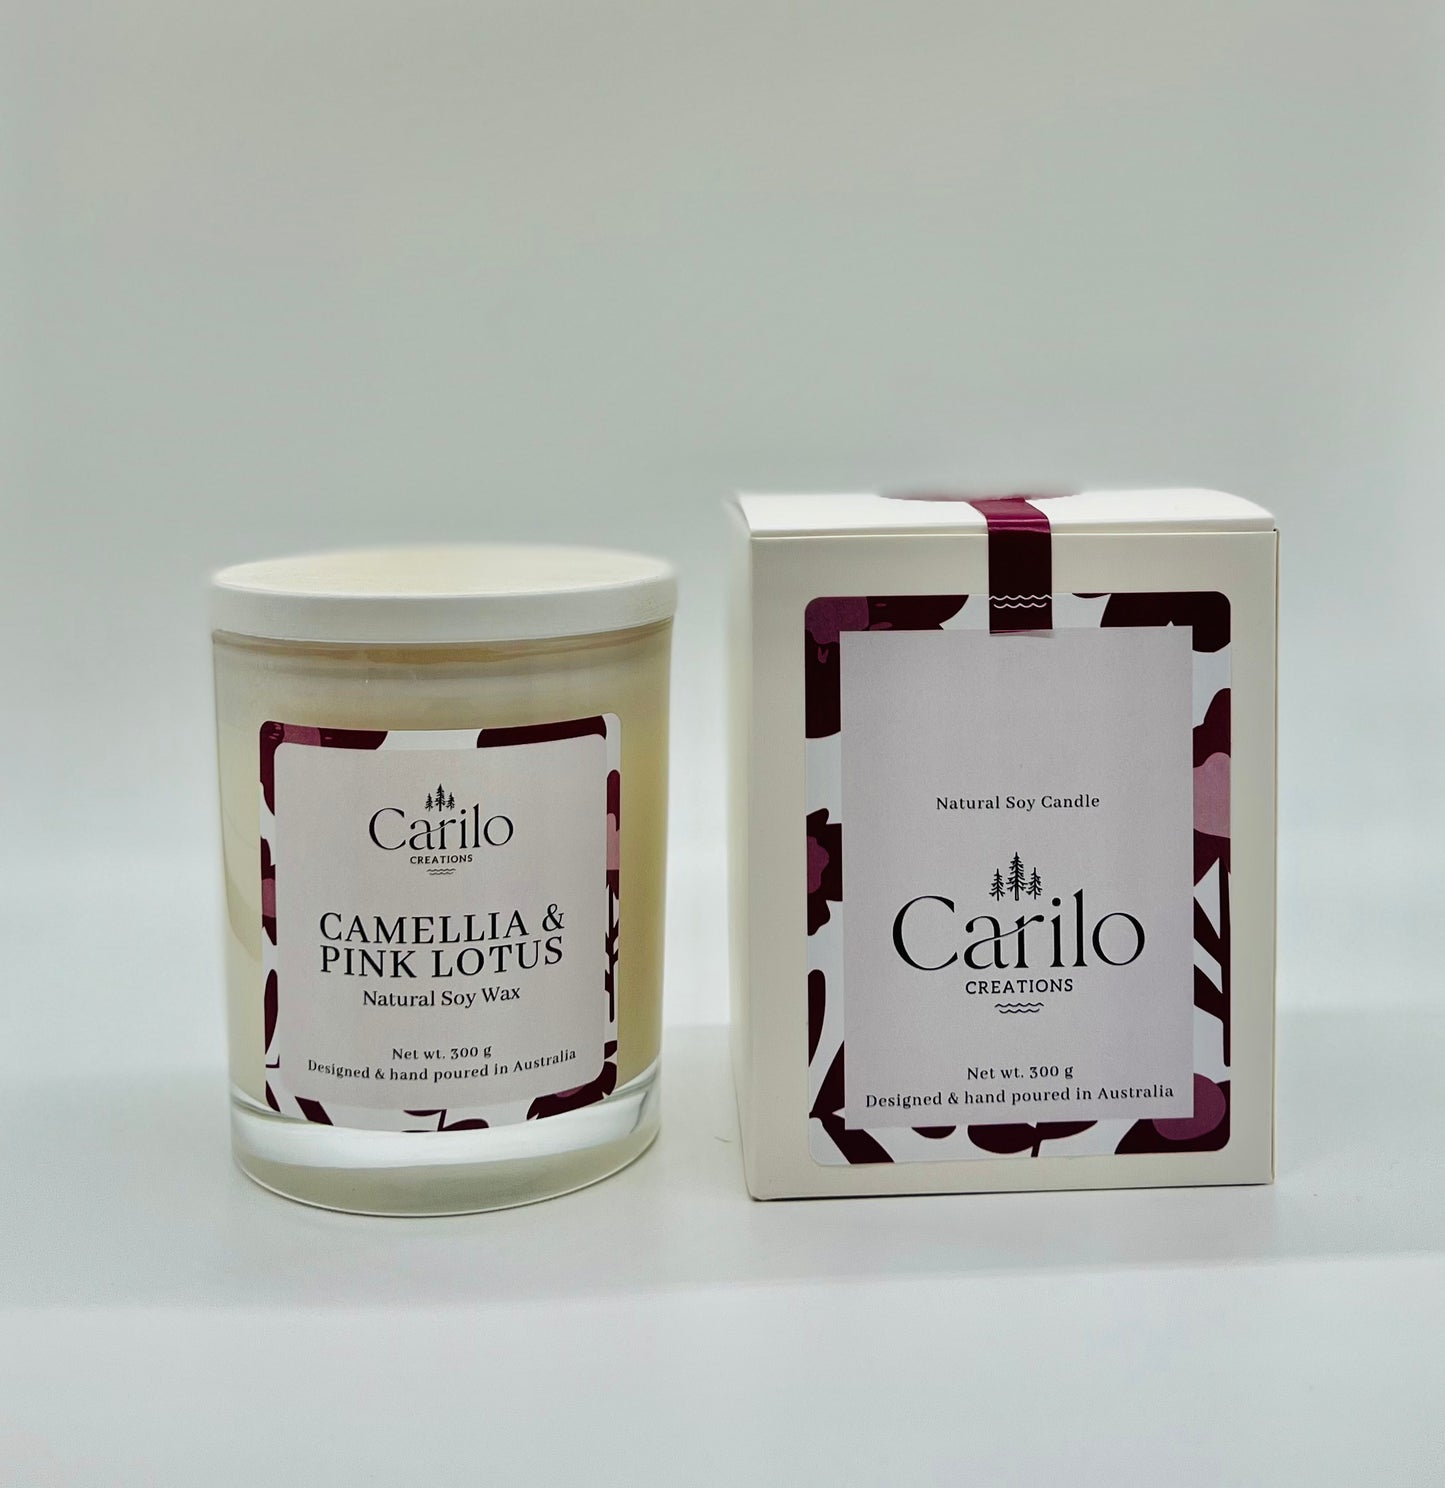 CAMELLIA & PINK LOTUS SCENTED CANDLE - 300g